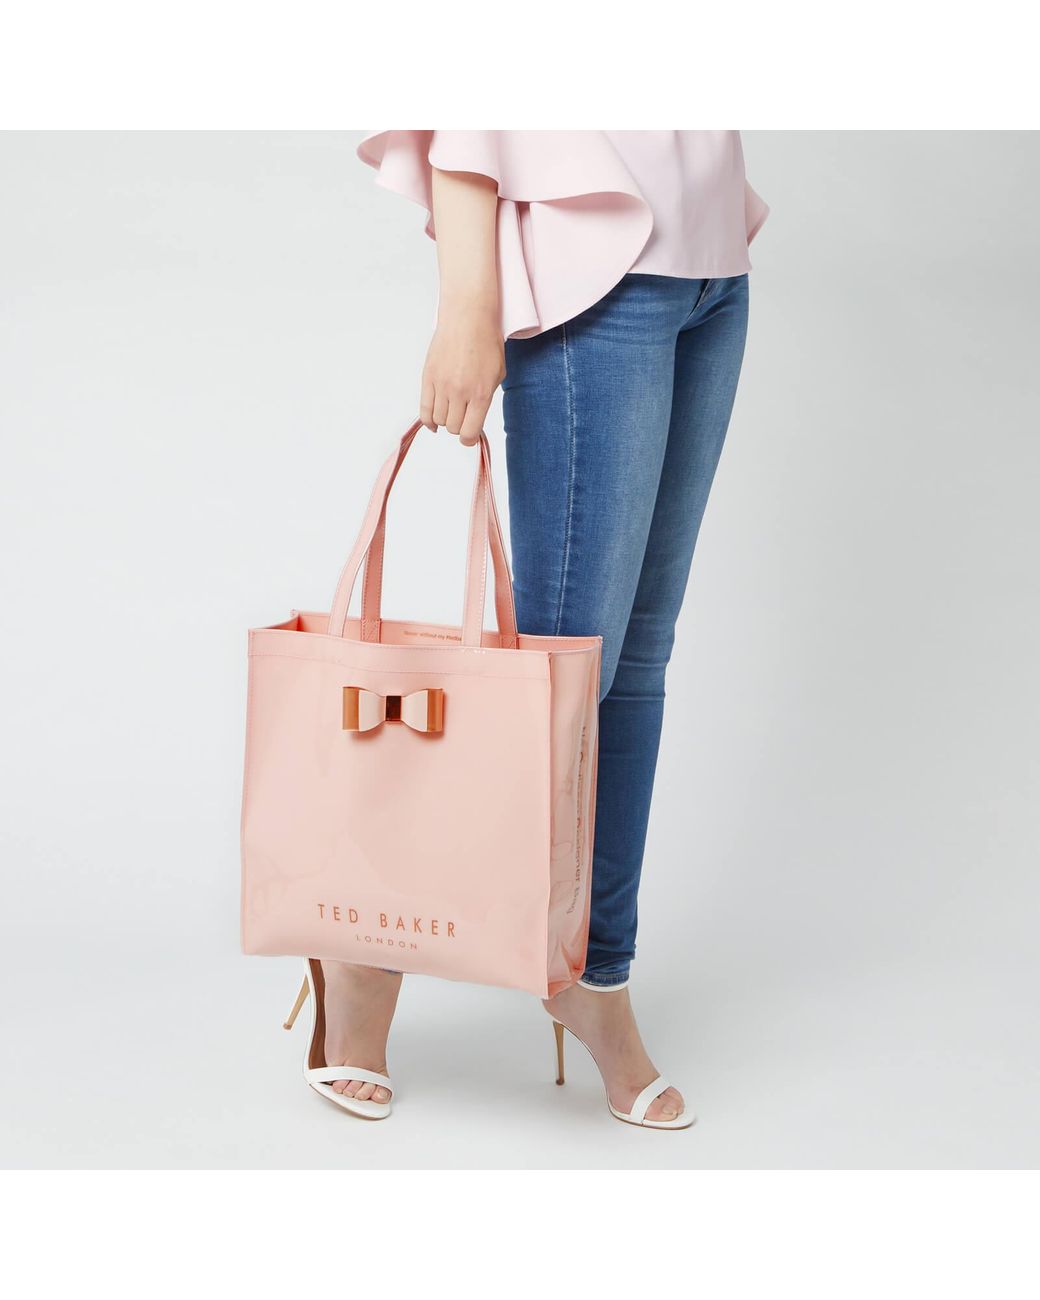 Ted Baker Cut Out Large Icon Bag in Rose Gold